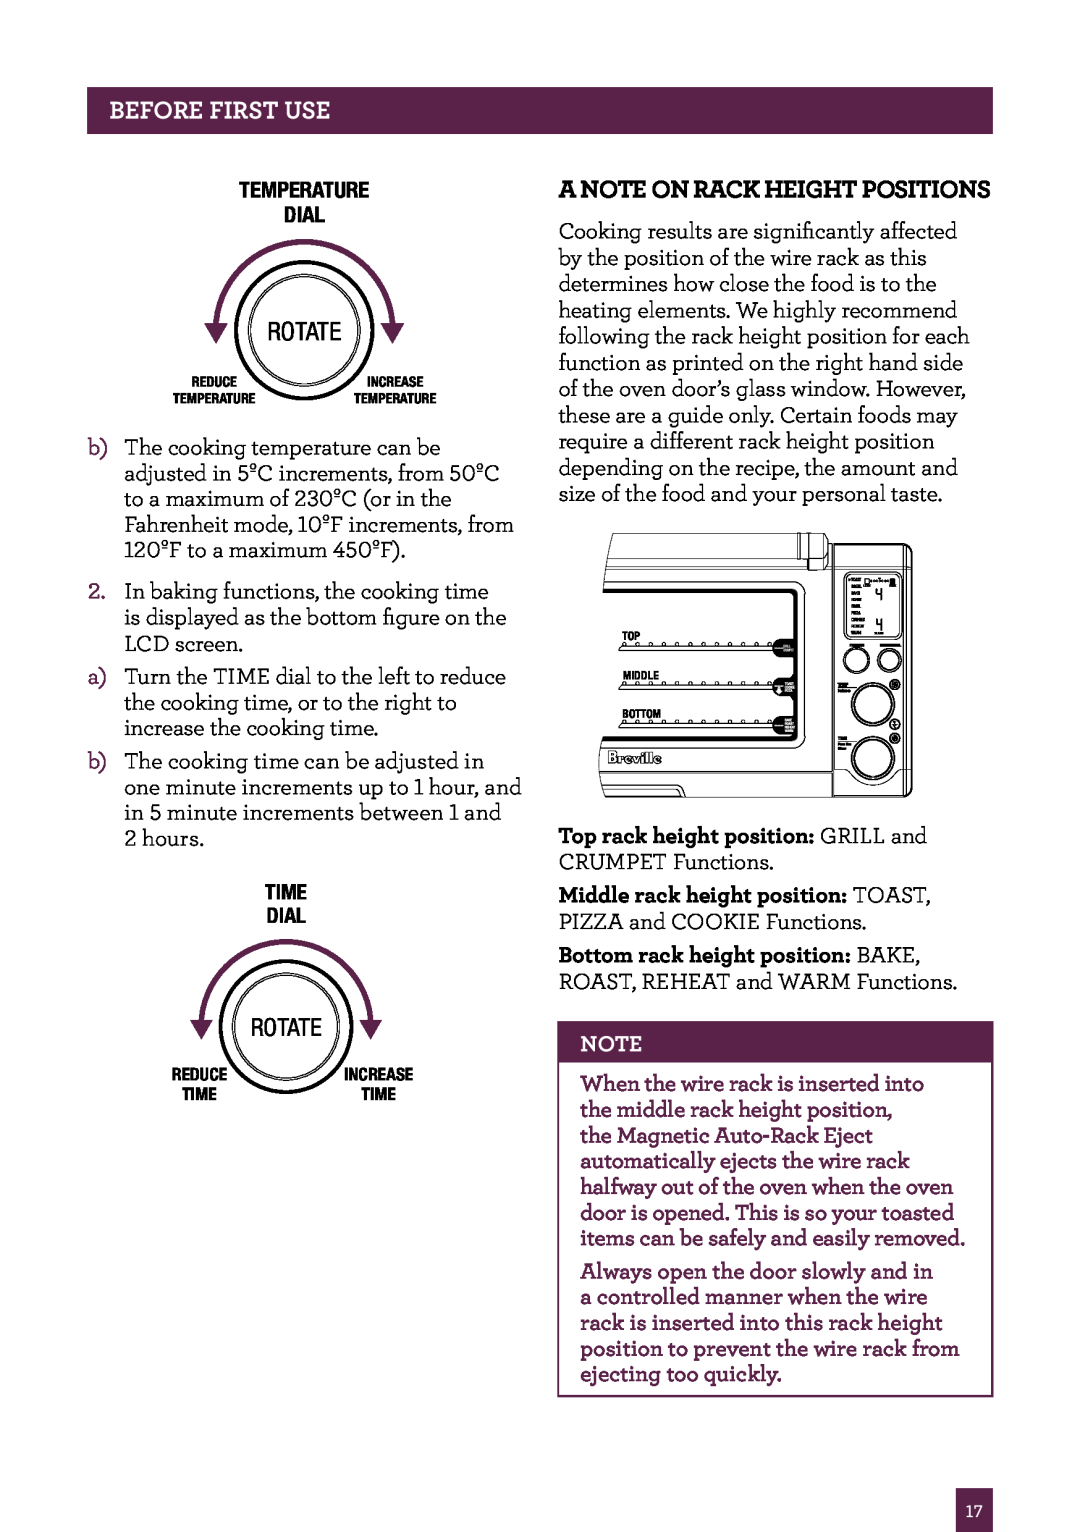 Breville BOV800 manual A note on rack height positions, Before First Use, Rotate, Temperature Dial 